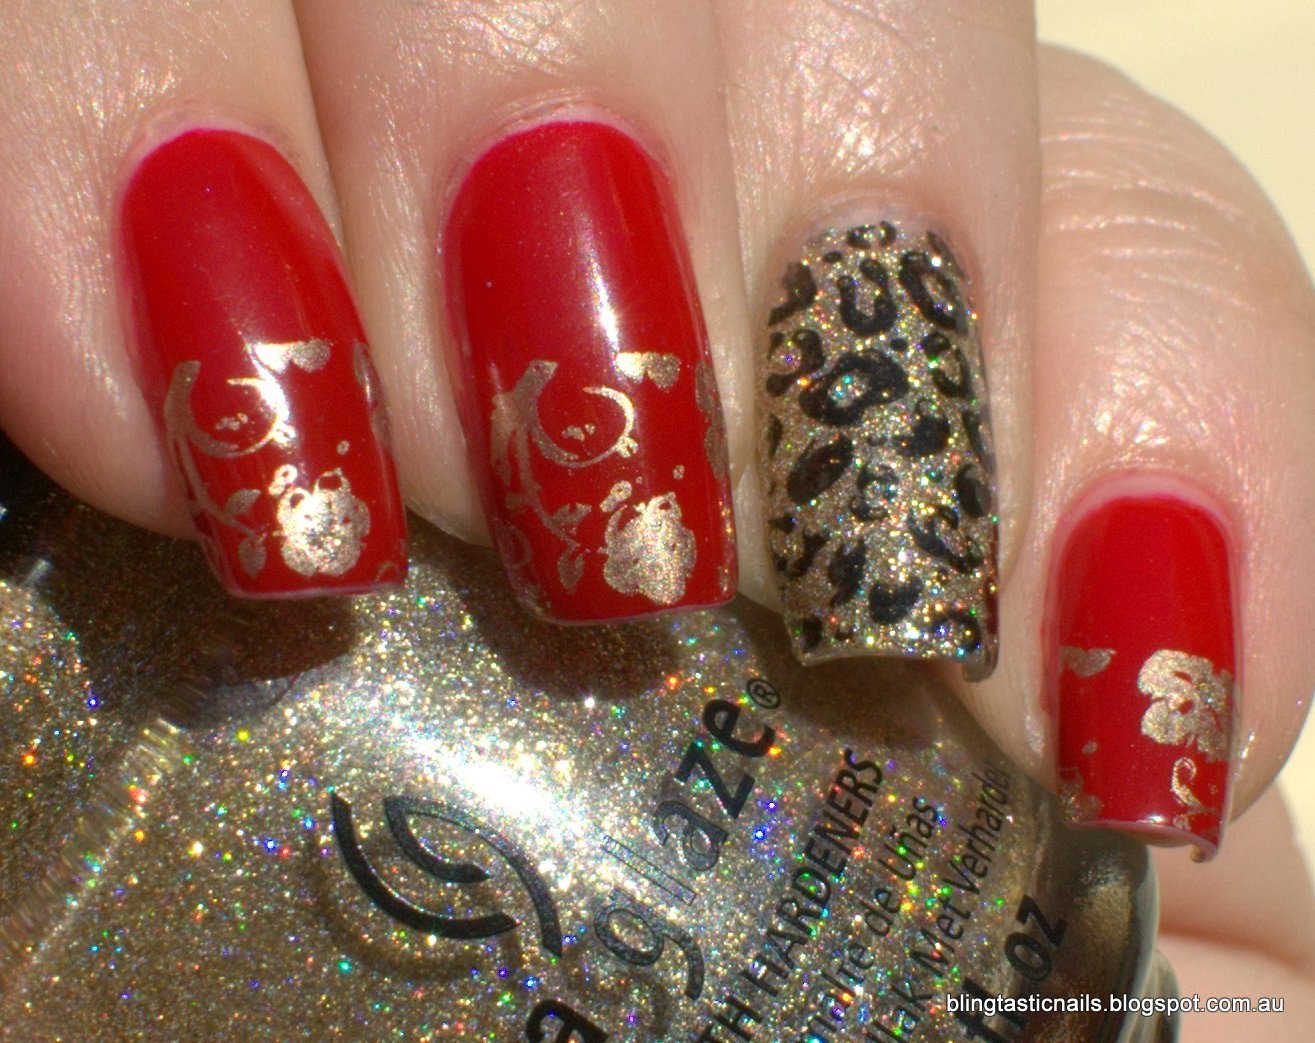 China Glaze I'm Not a Lion with Essence Fame Fatale and stamping